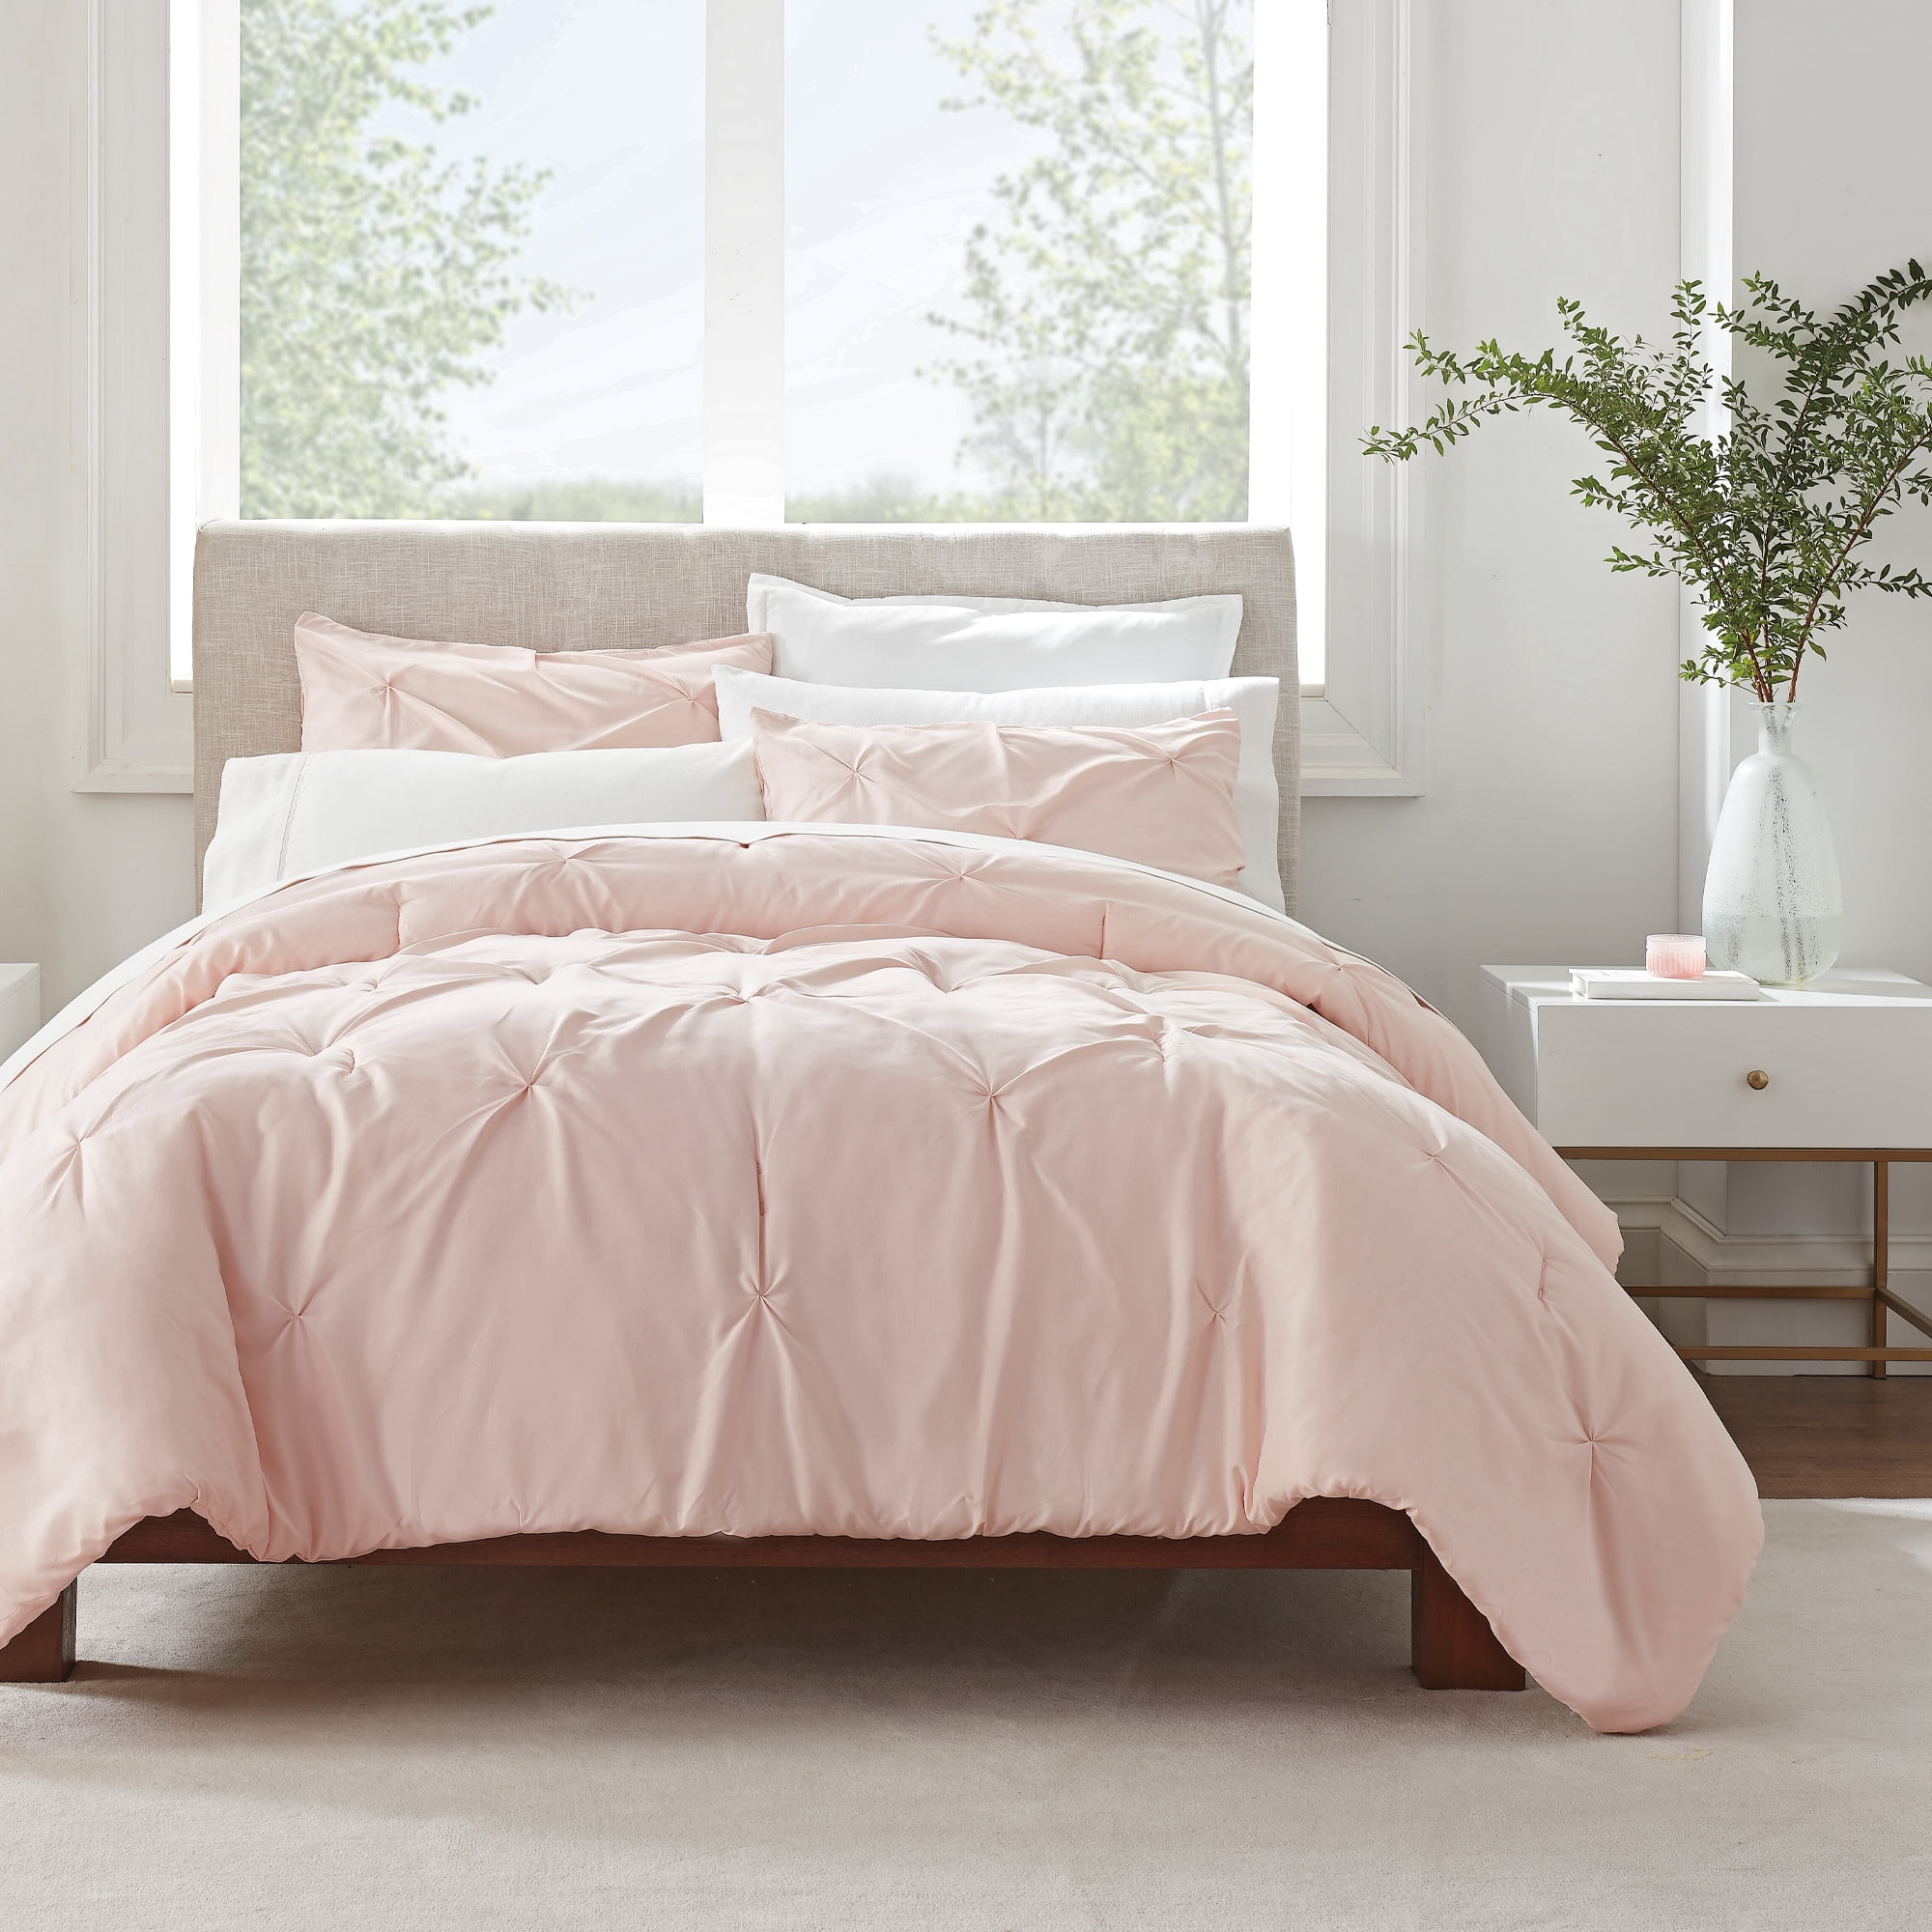 Solid Clean Pleated Full/Queen Simply Pink 3-Piece Blush Comforter Antimicrobial Set, Serta